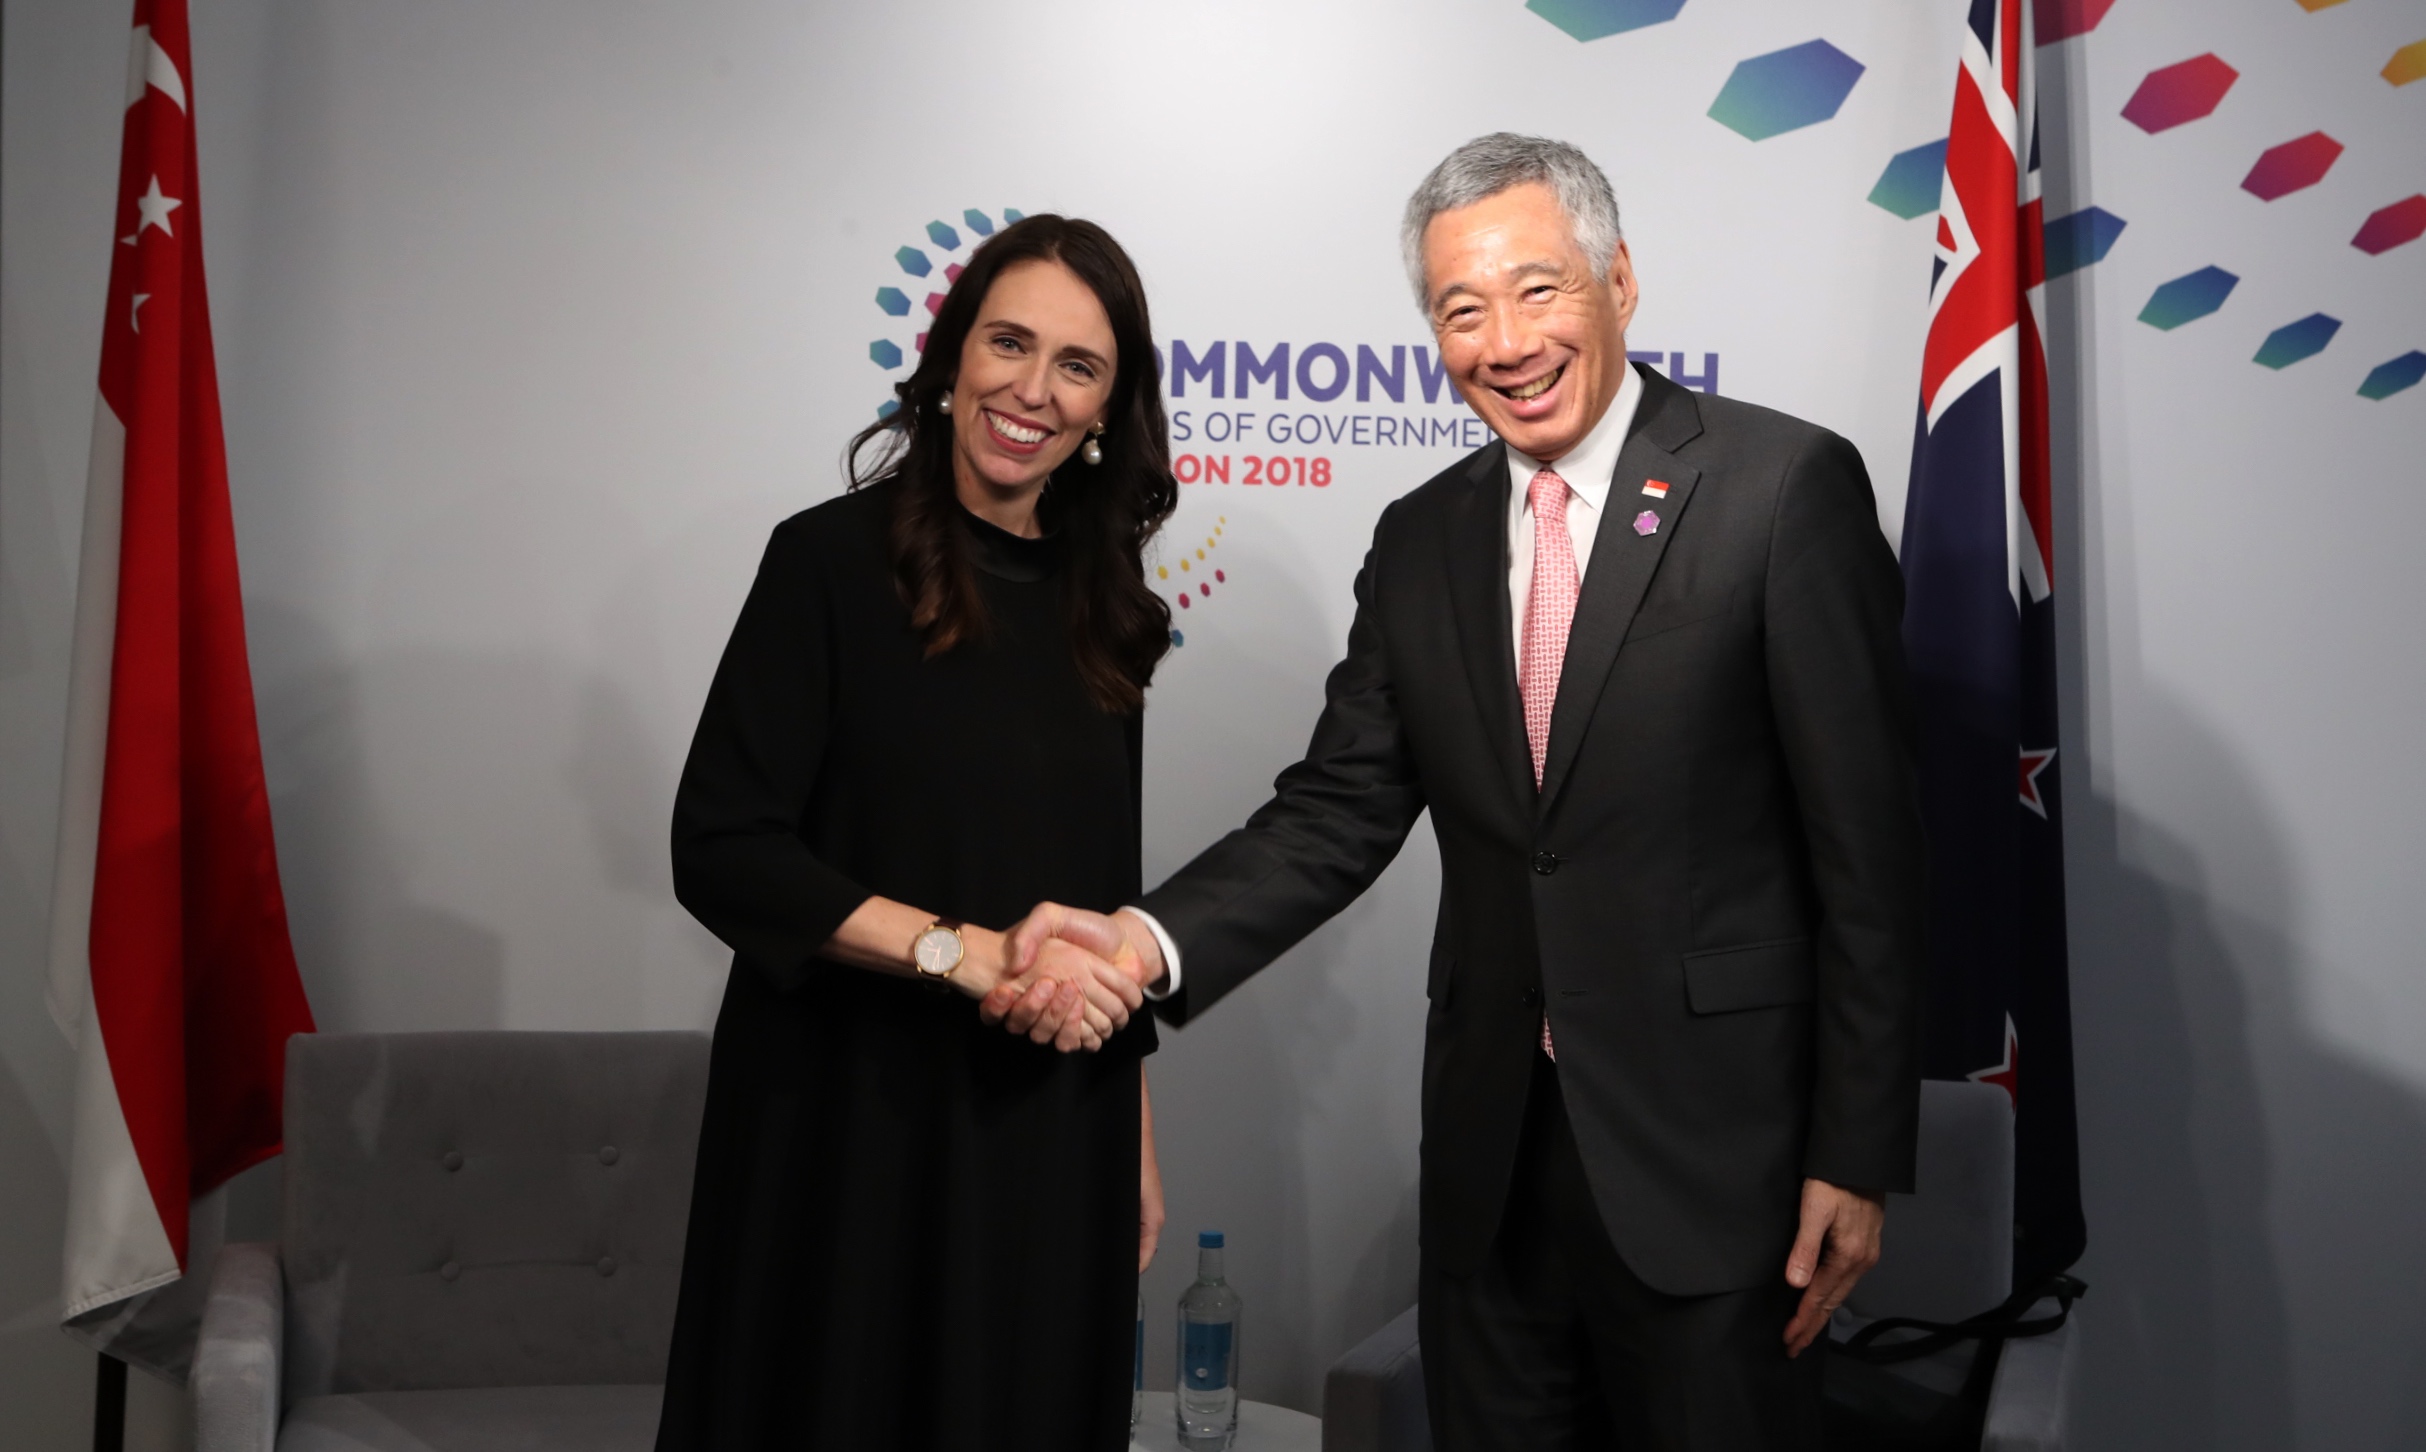 PM Lee Hsien Loong with New Zealand PM Jacinda Arden